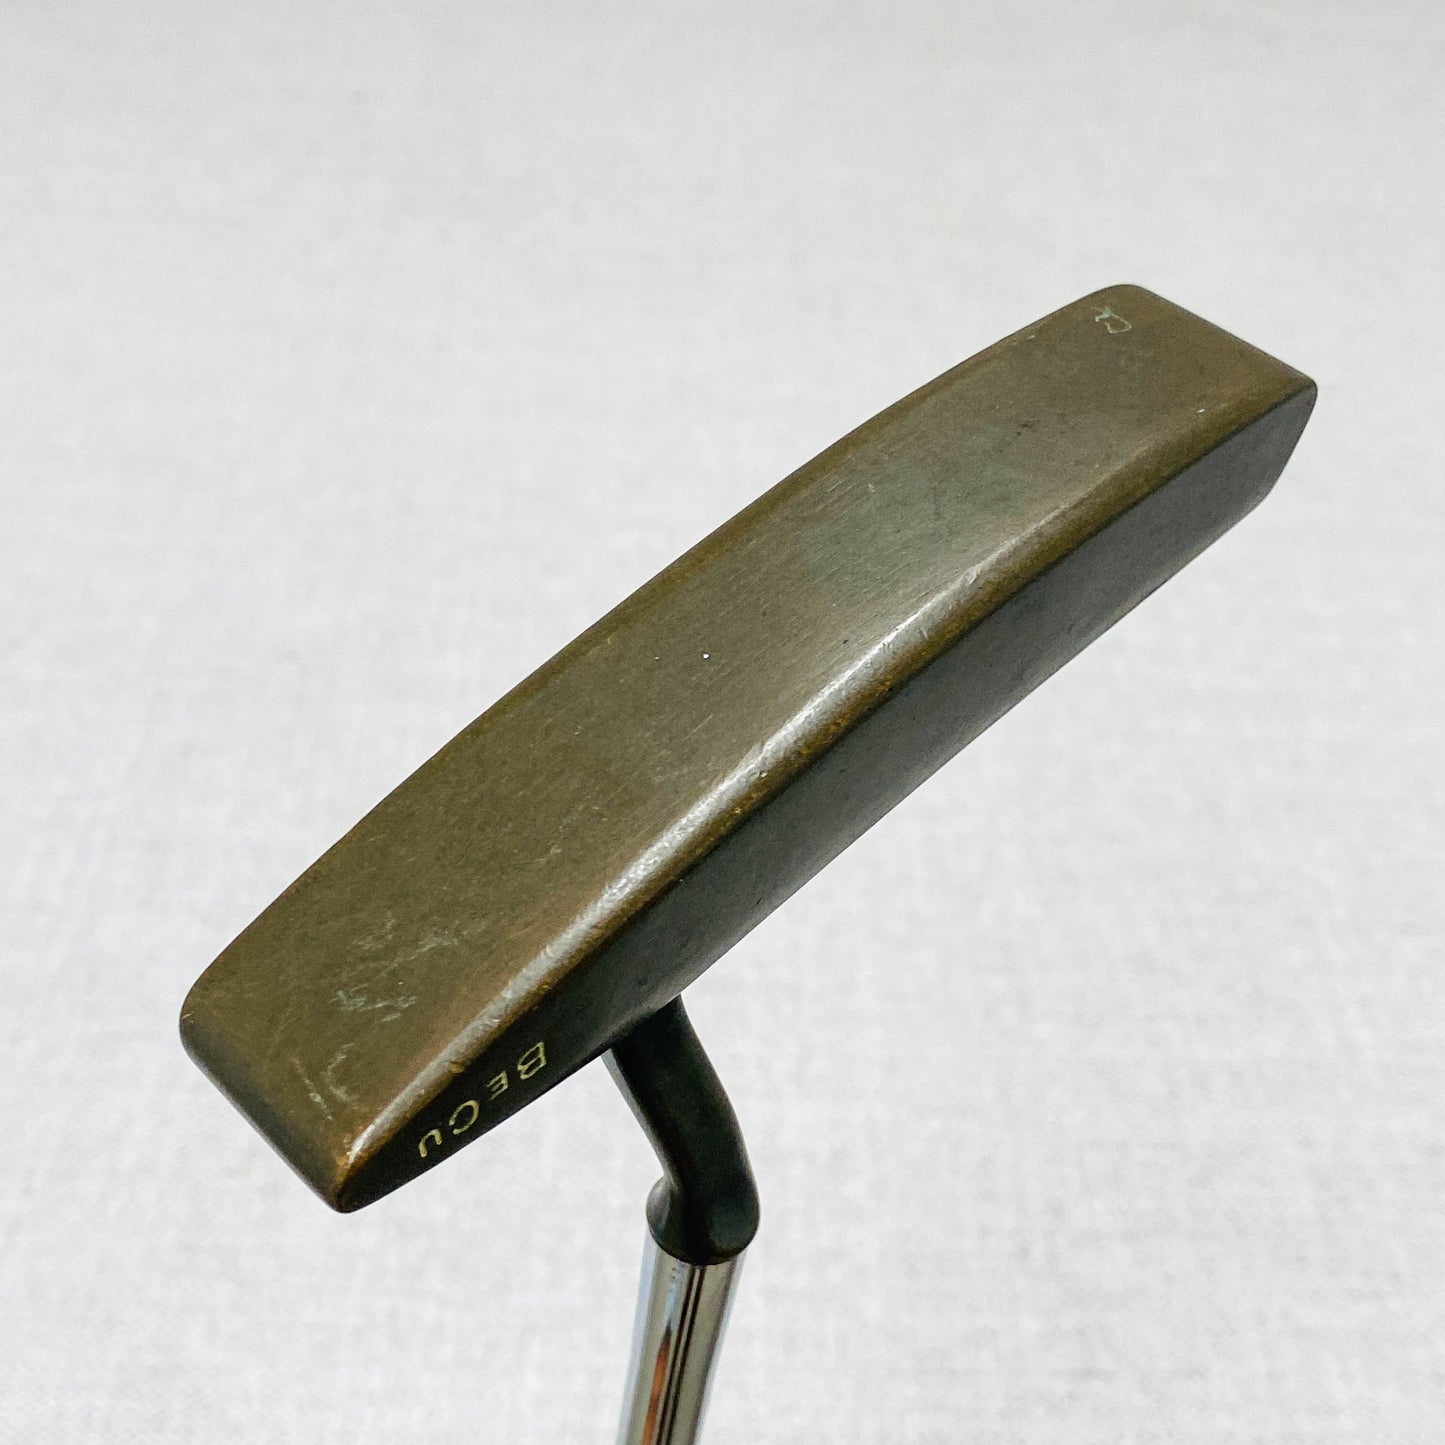 PING Pal 2 Beryllium Copper Putter. 35 inch - Excellent Condition # T1013